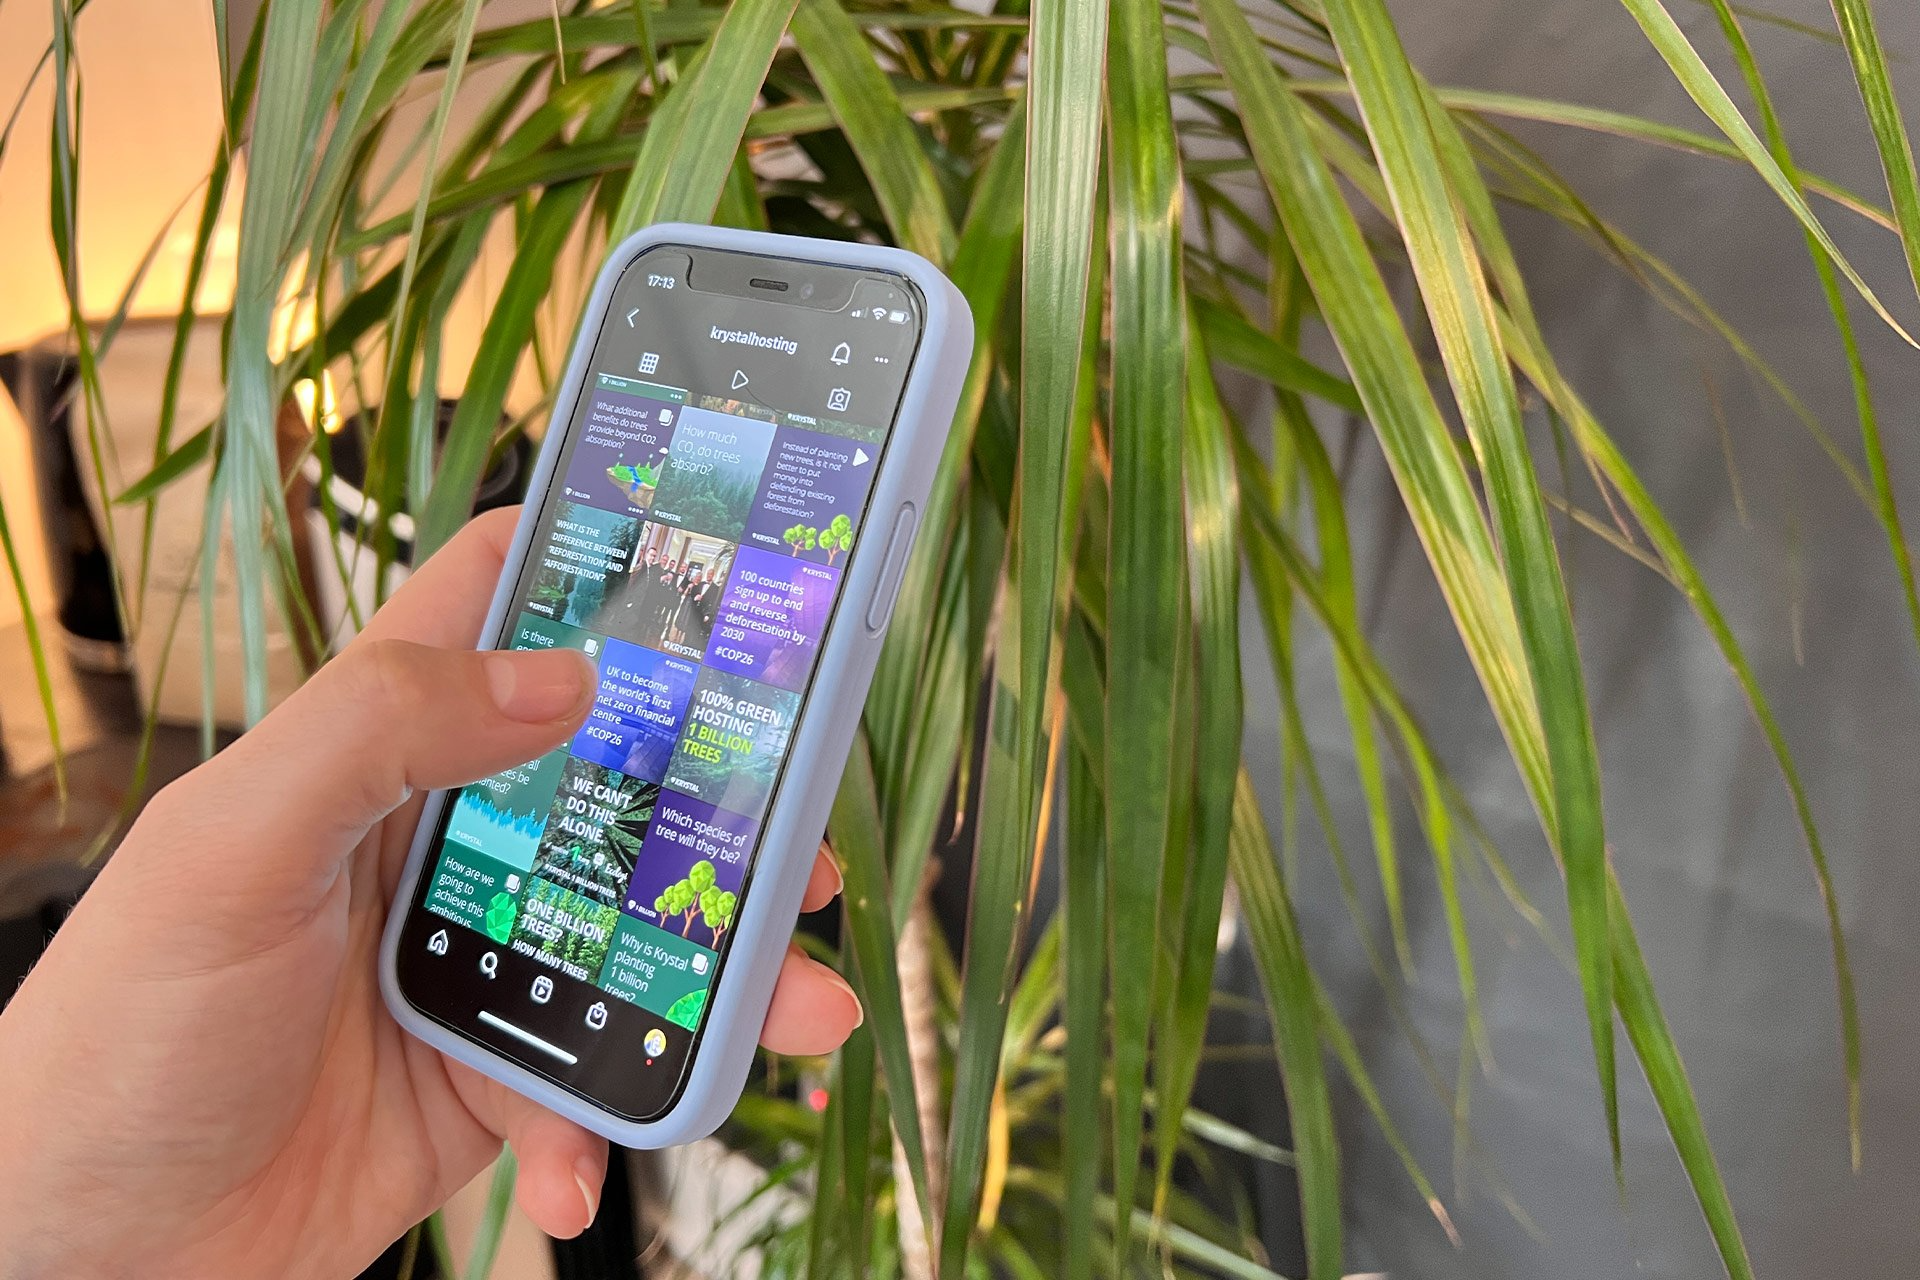 A hand holds a phone in front of a backdrop of foliage. A turquoise, green and purple themed social media feed is visible on the screen.